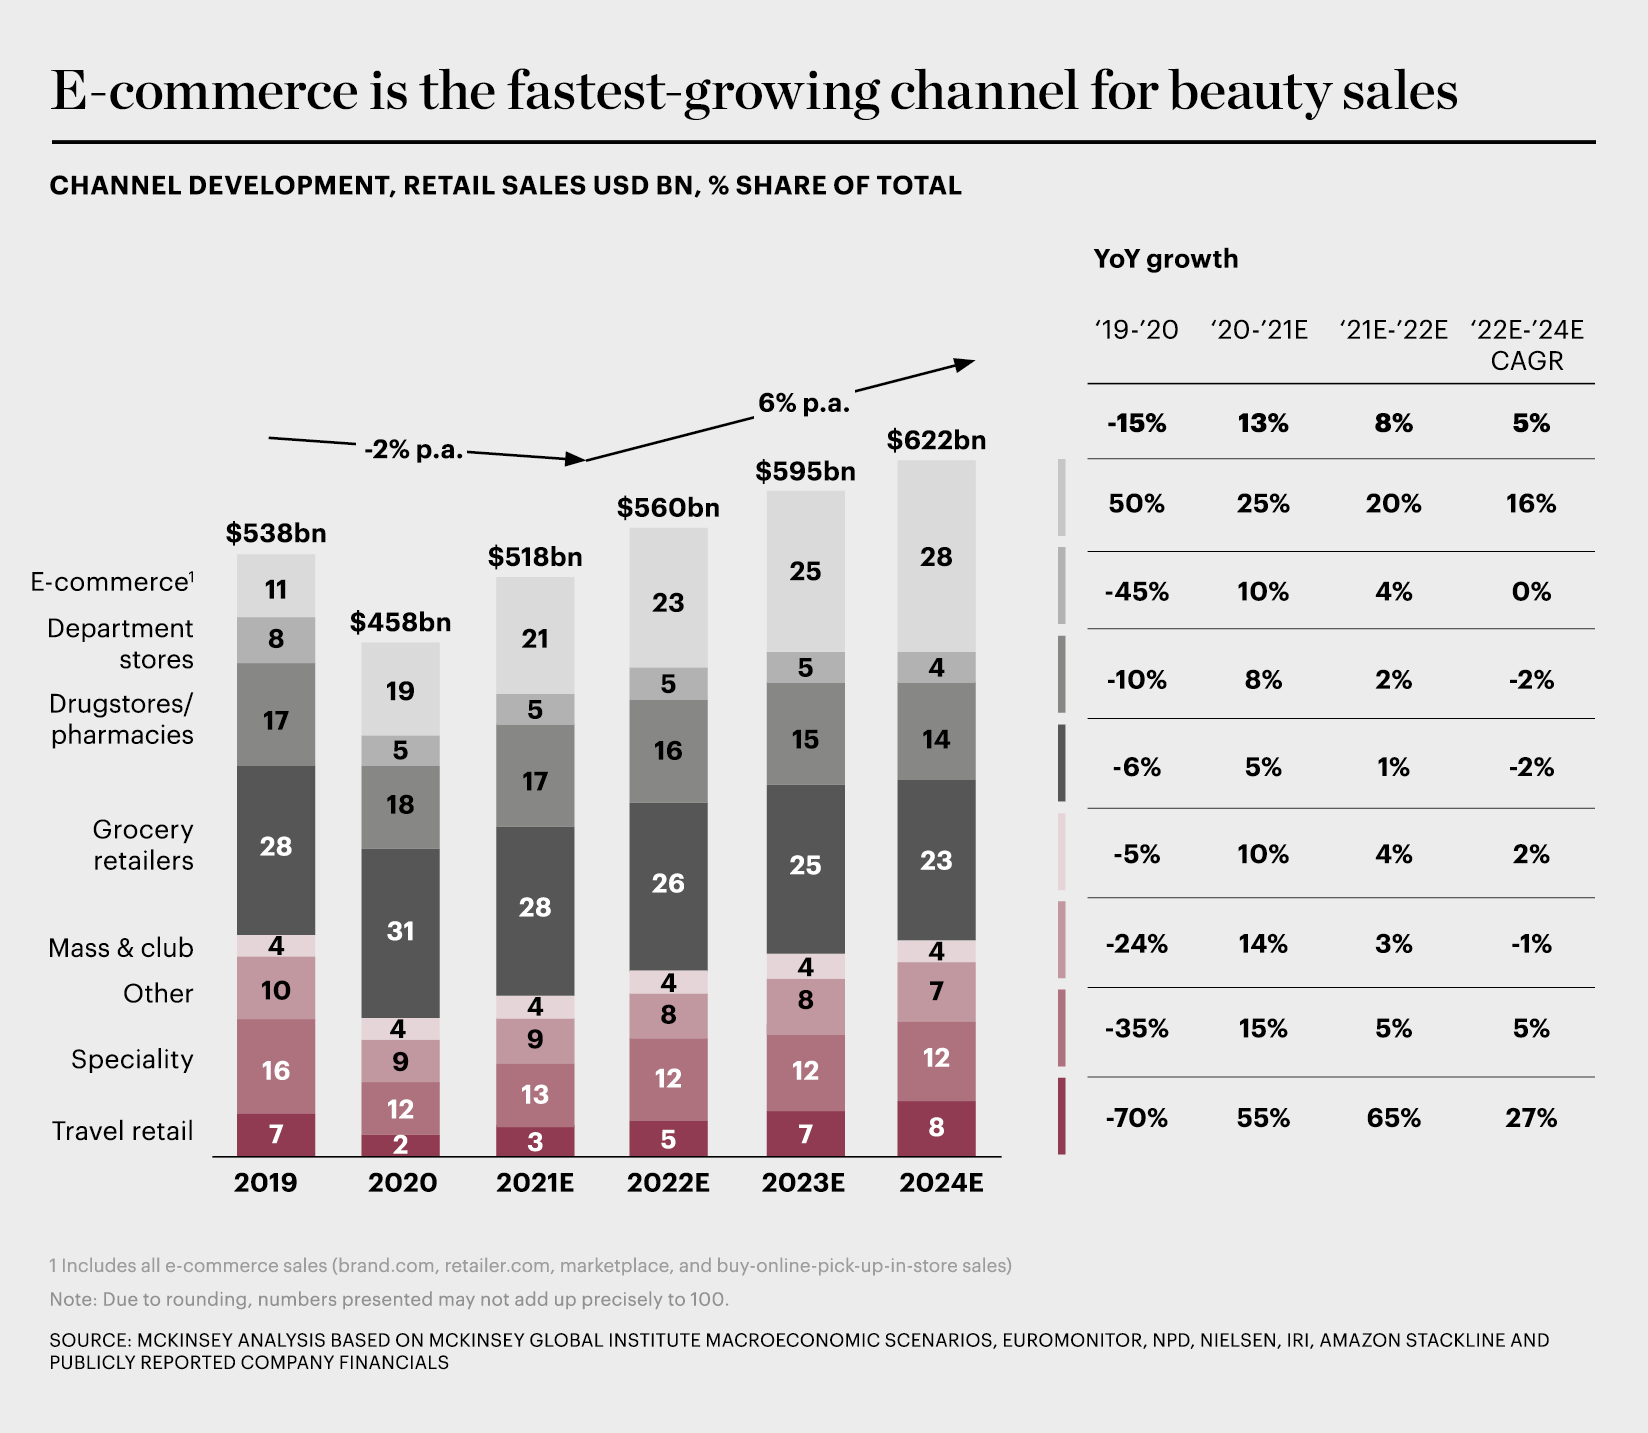 The EXPLOSIVE growth of beauty over the past 20 years - Retail Beauty